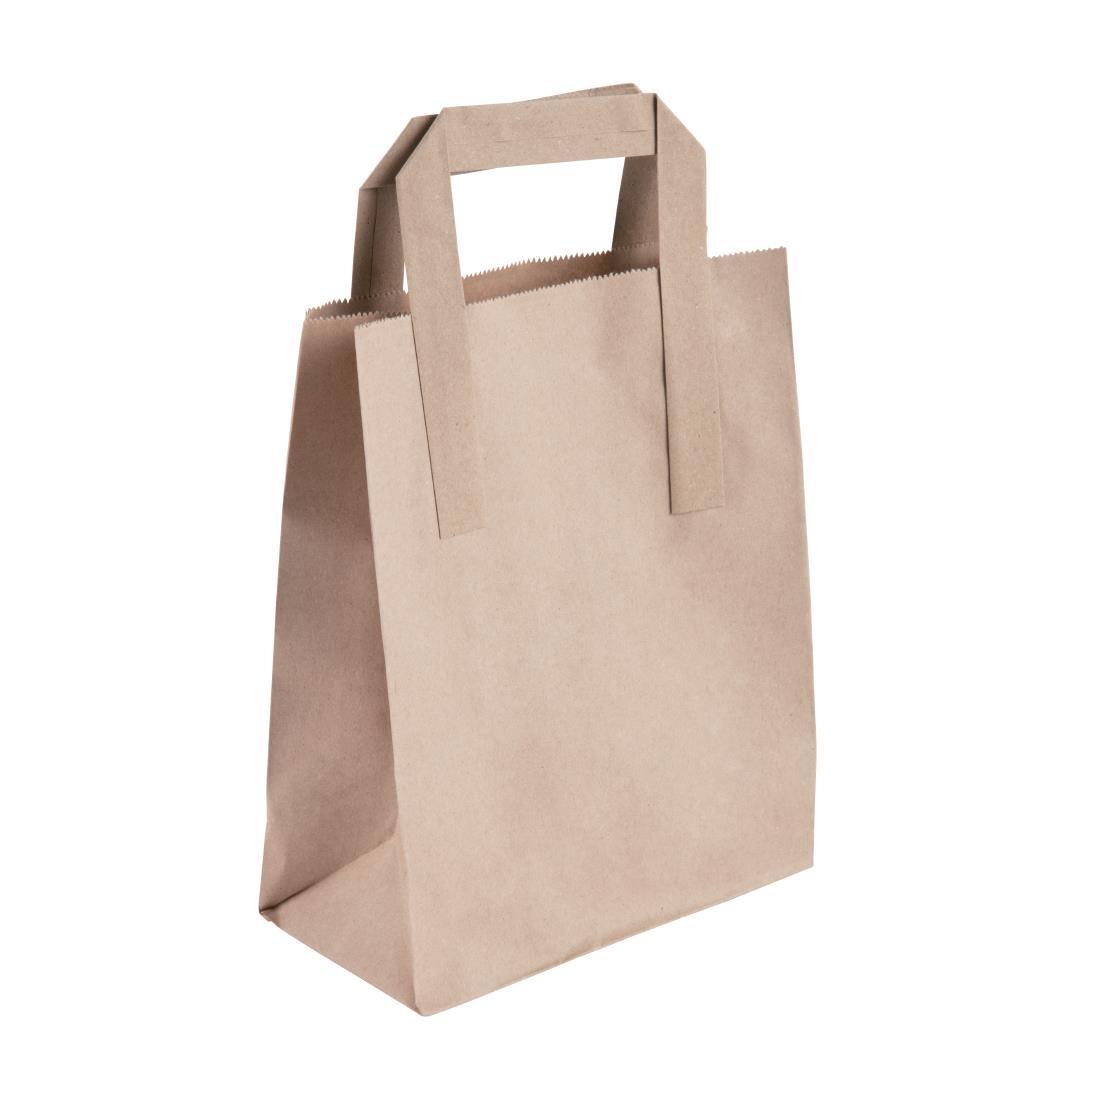 Fiesta Large Paper Bag Next working day UK Delivery Pack of 1000 